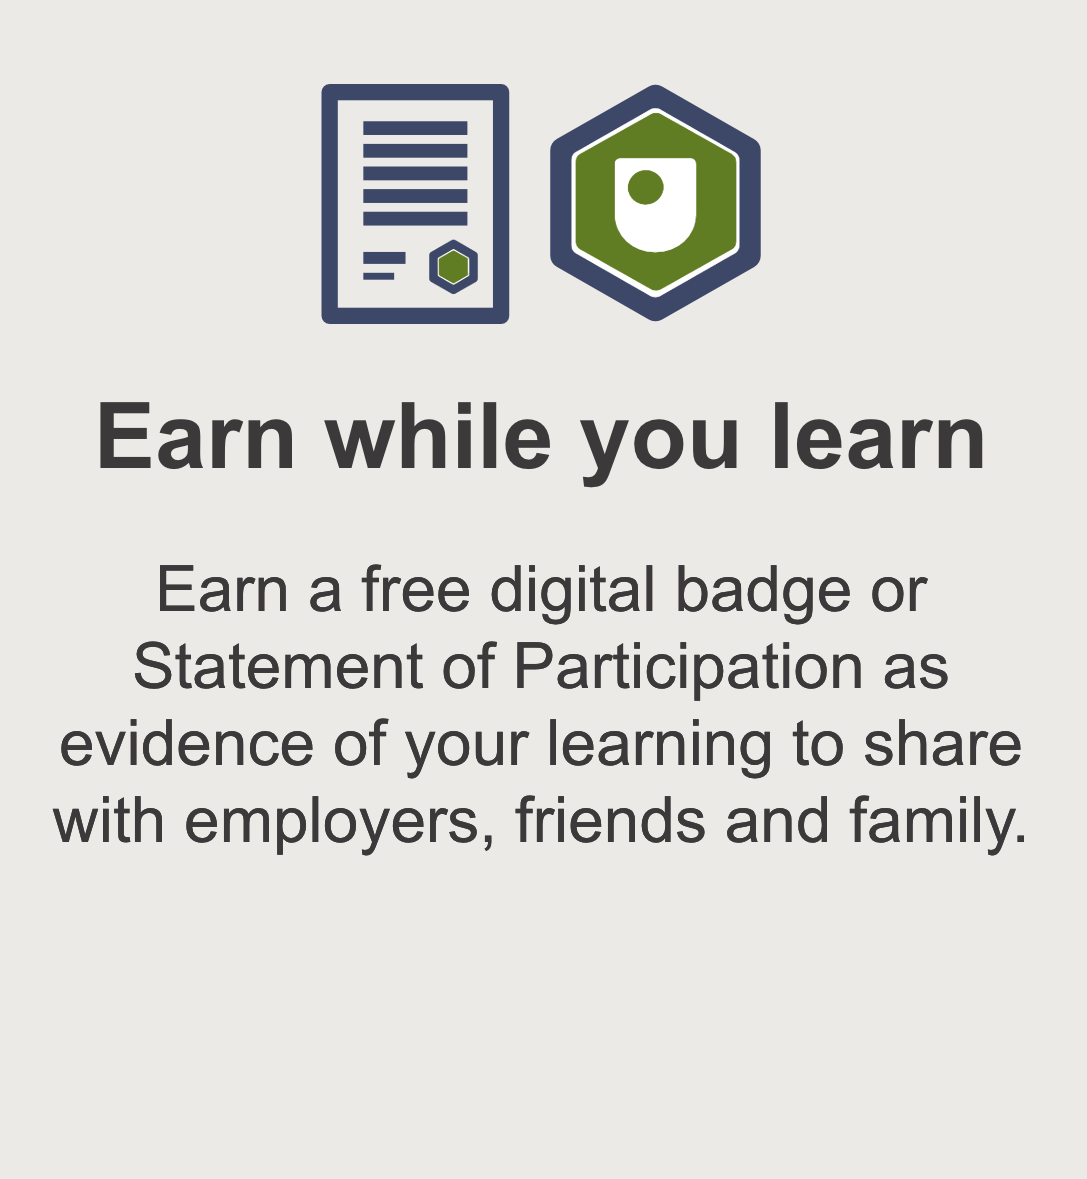 An infographic highlight the benefits of OpenLearn for earning while you learn.